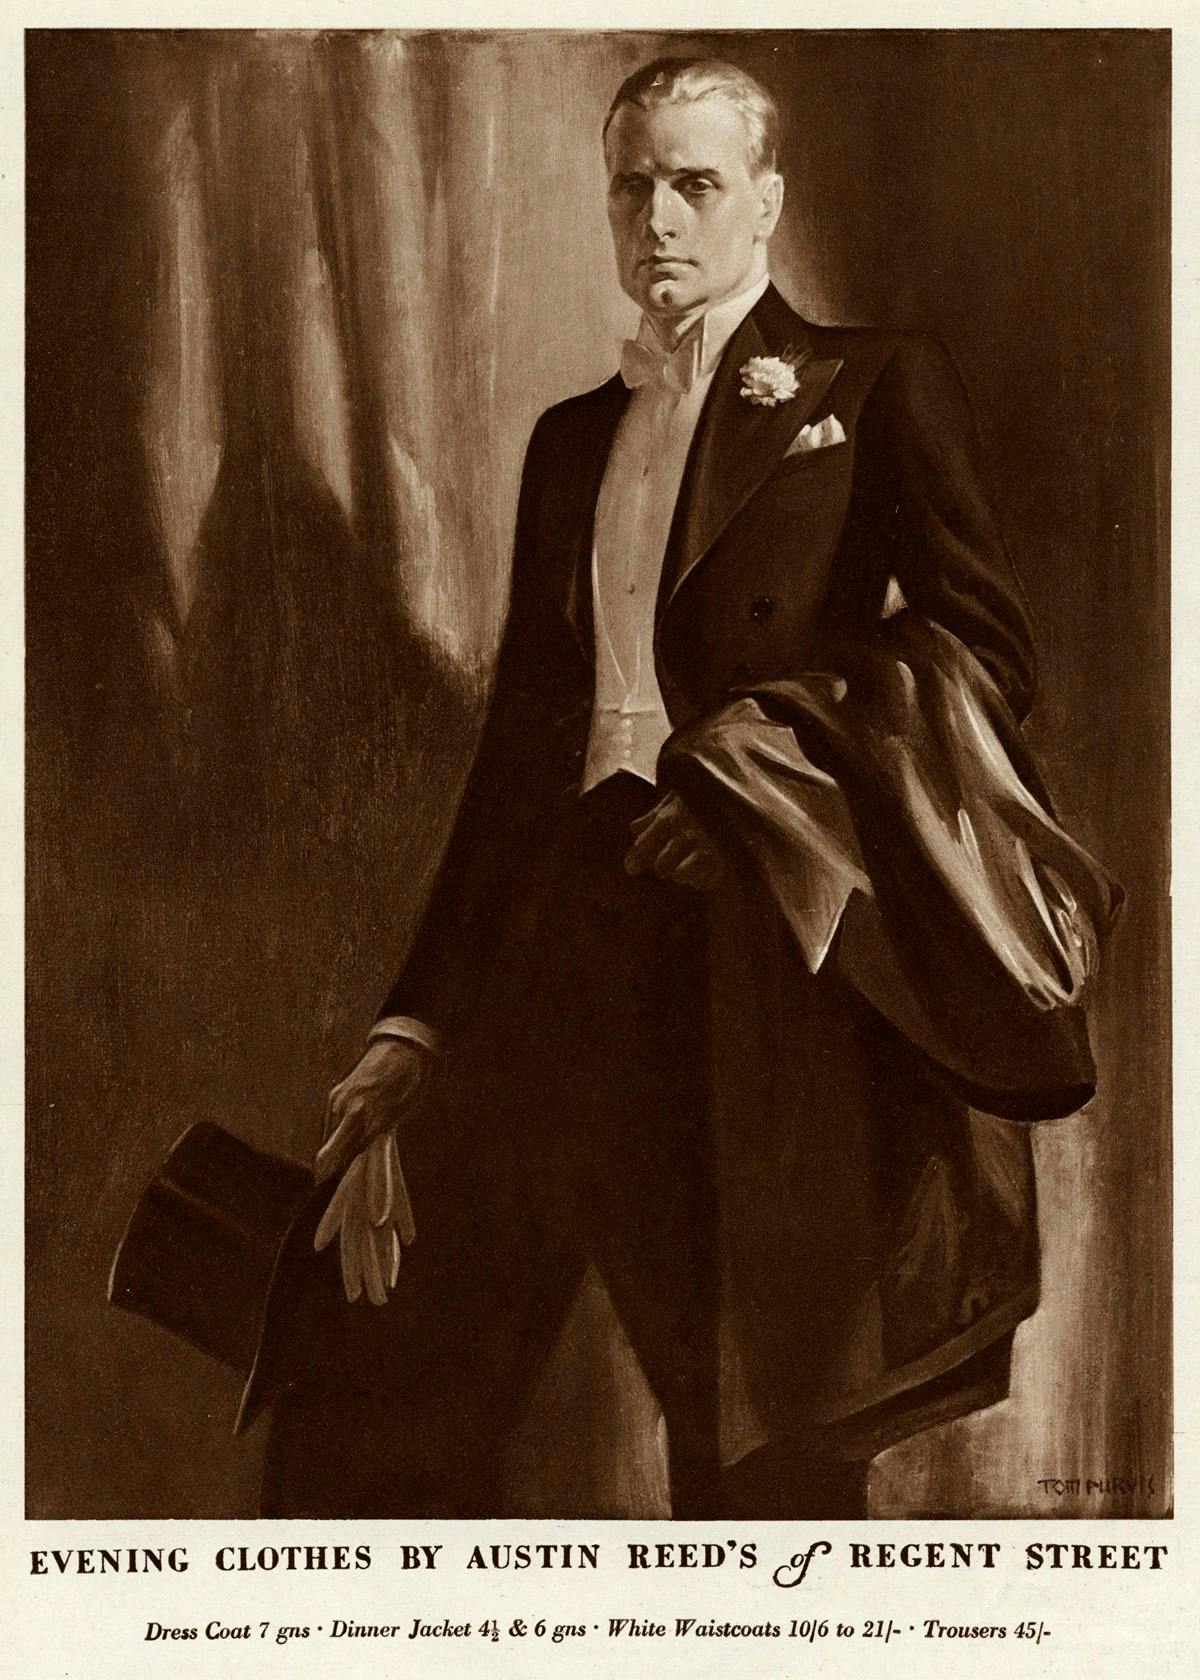 A full page illustrated advert. It shows a gentleman wearing fine evening clothes - a suit, waistcoat, shirt, and bowtie, with fine evening gloves and a top hat. Beneath the illustration text says "EVENING CLOTHES BY AUSTIN REED'S of REGENT STREET Dress Coat 7 gns Dinner Jacket 4 1/2 & 6 gns White Waistcoats 10/6 to 21/- Trousers 45/-"